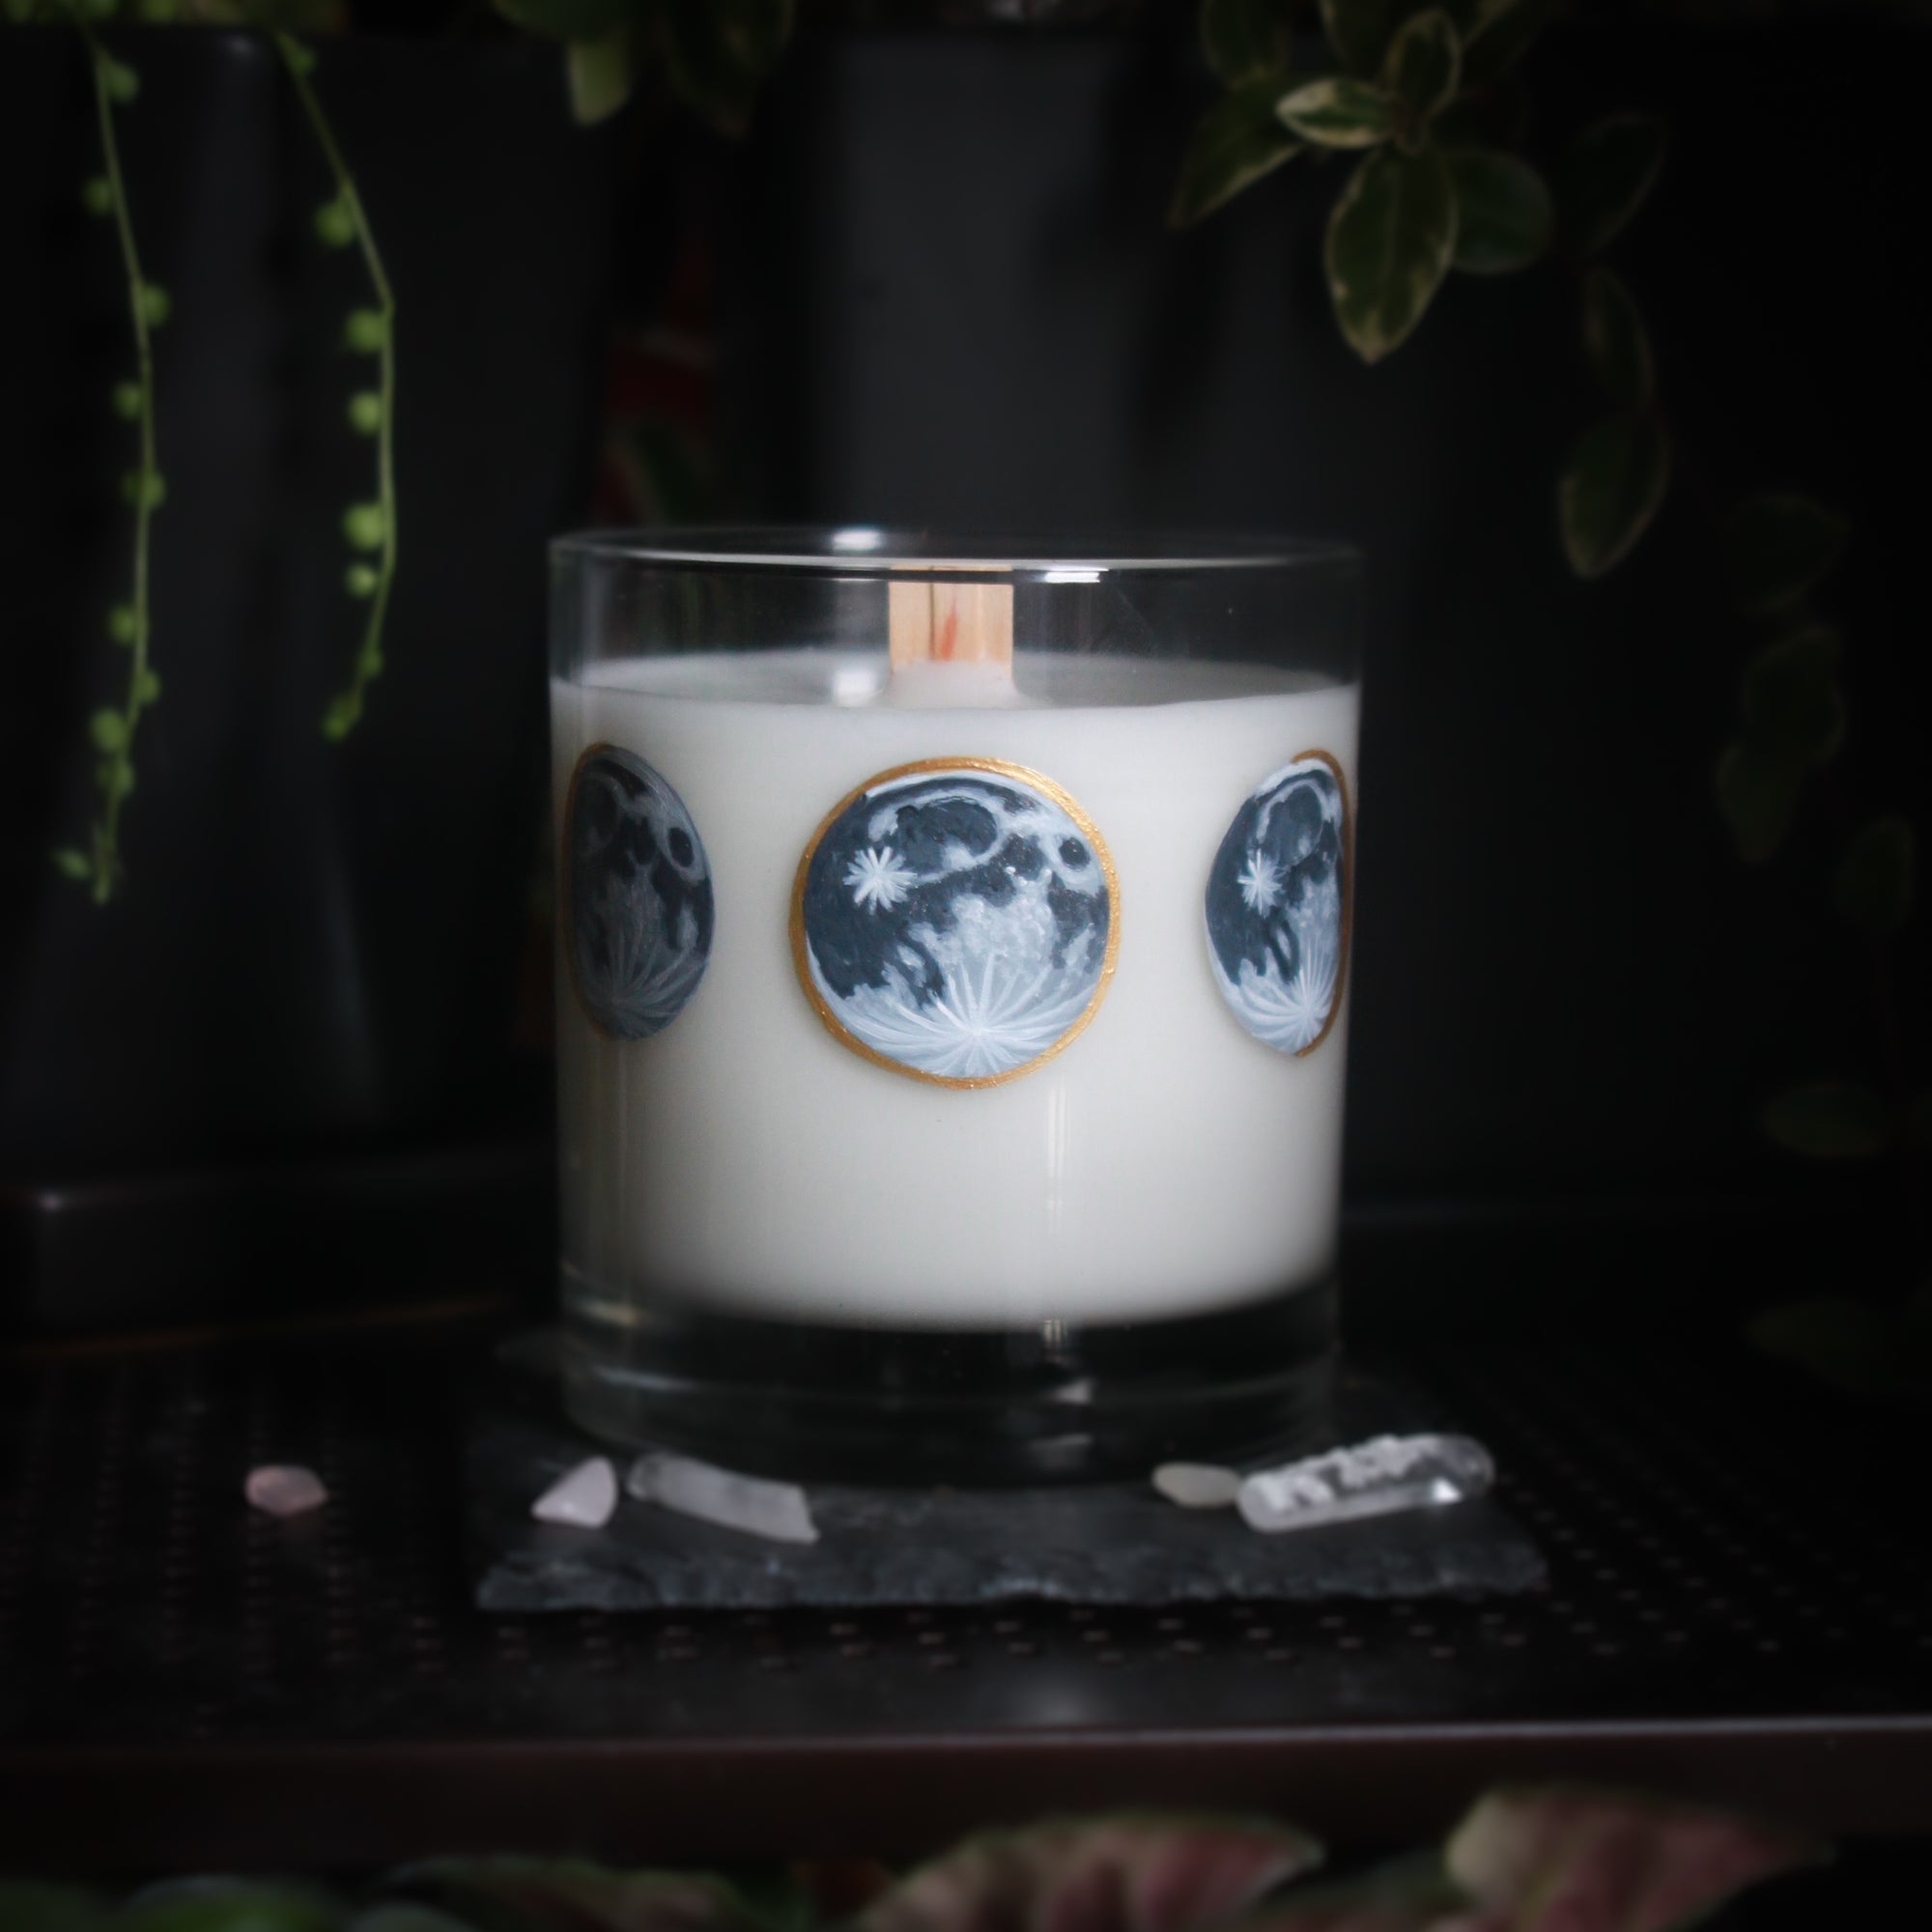 A white-wax candle with a wooden wick rests upon a dark surface with plants and crystals visible in the scene. The light candle stands out in contrast against the dark background. The candle glass has 8 phases of the moon painted in shades of gray with gold accents circling the glass. This angle depicts the full moon with two gibbous moons on either side of it.